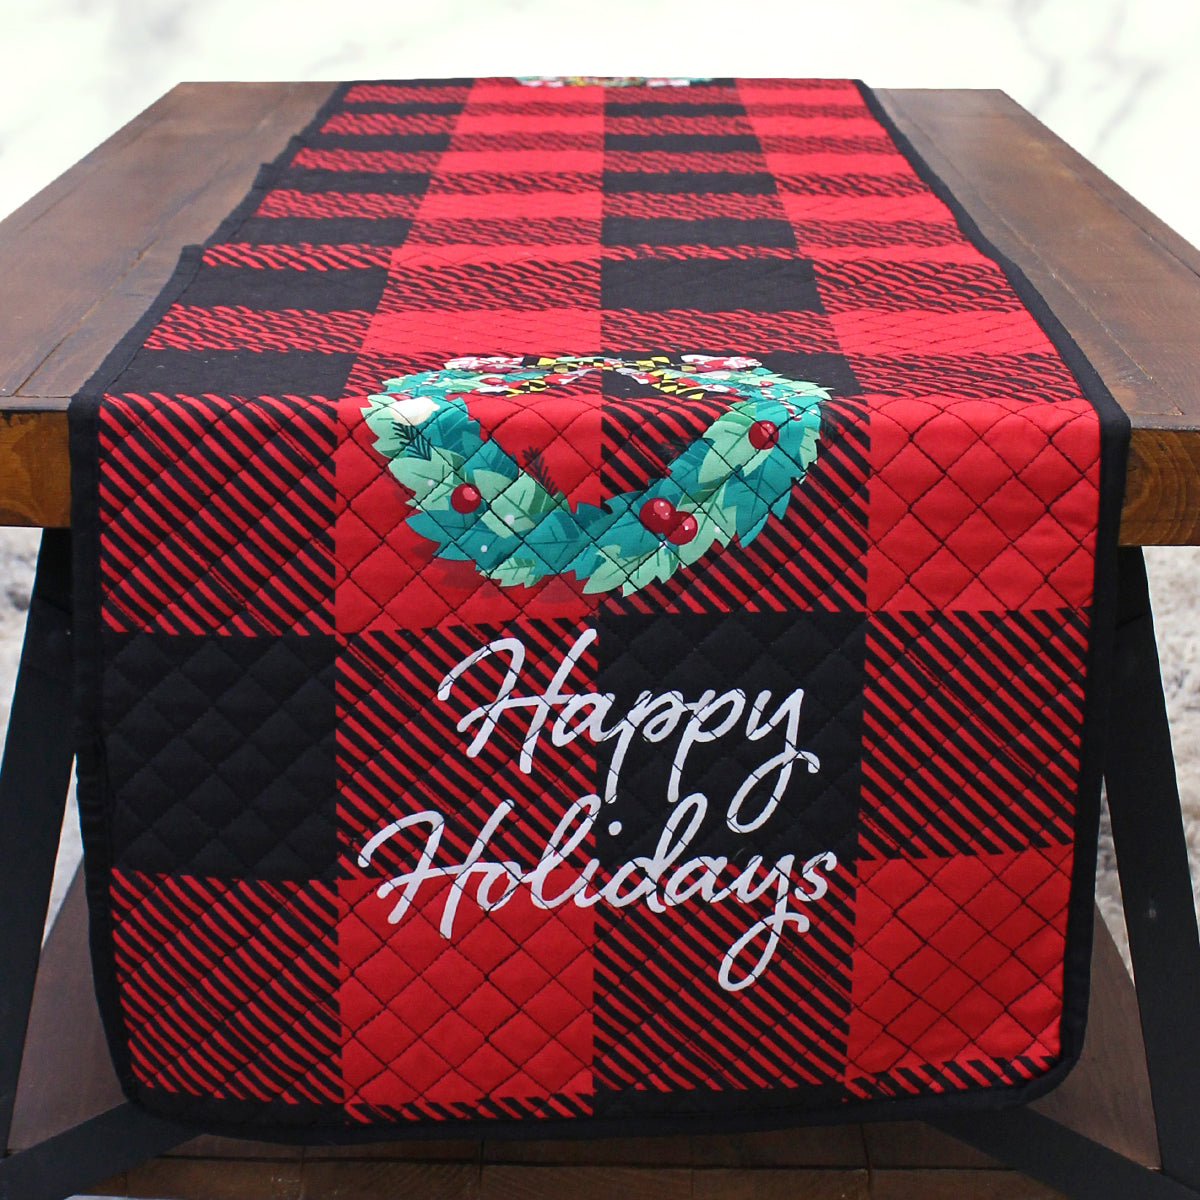 Happy Holidays with Maryland Wreath (Quilted) / Table Runner - Route One Apparel